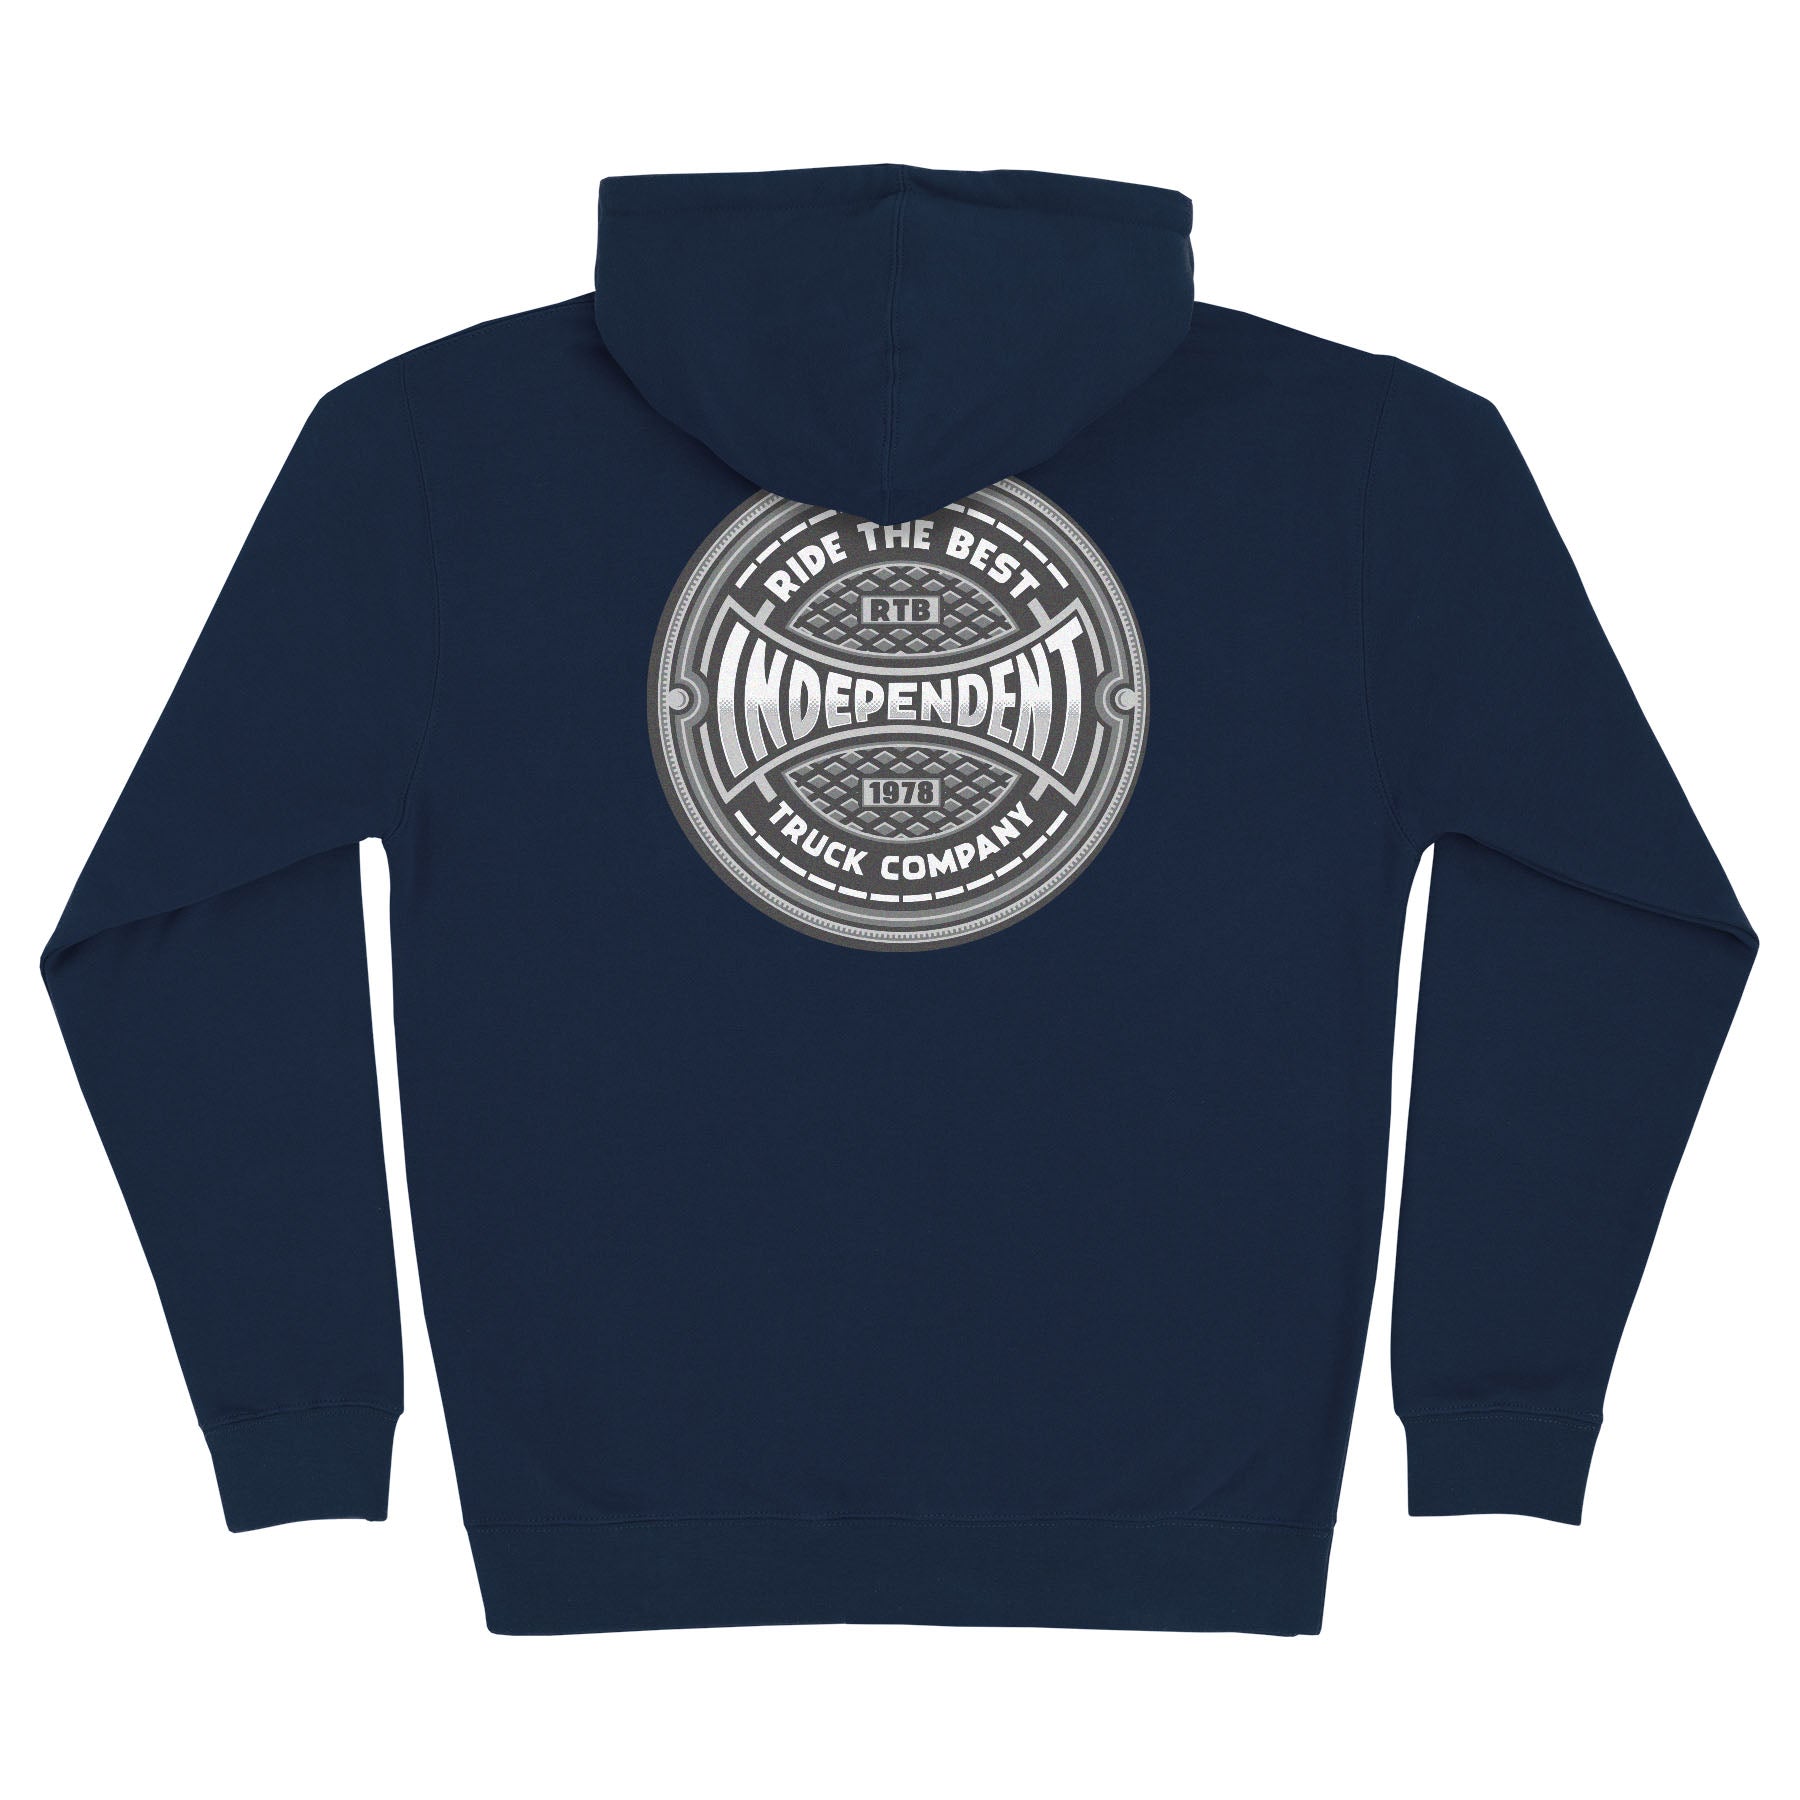 Independent Pavement Span Zip Hooded Heavyweight Sweatshirt Navy Blue - Invisible Board Shop